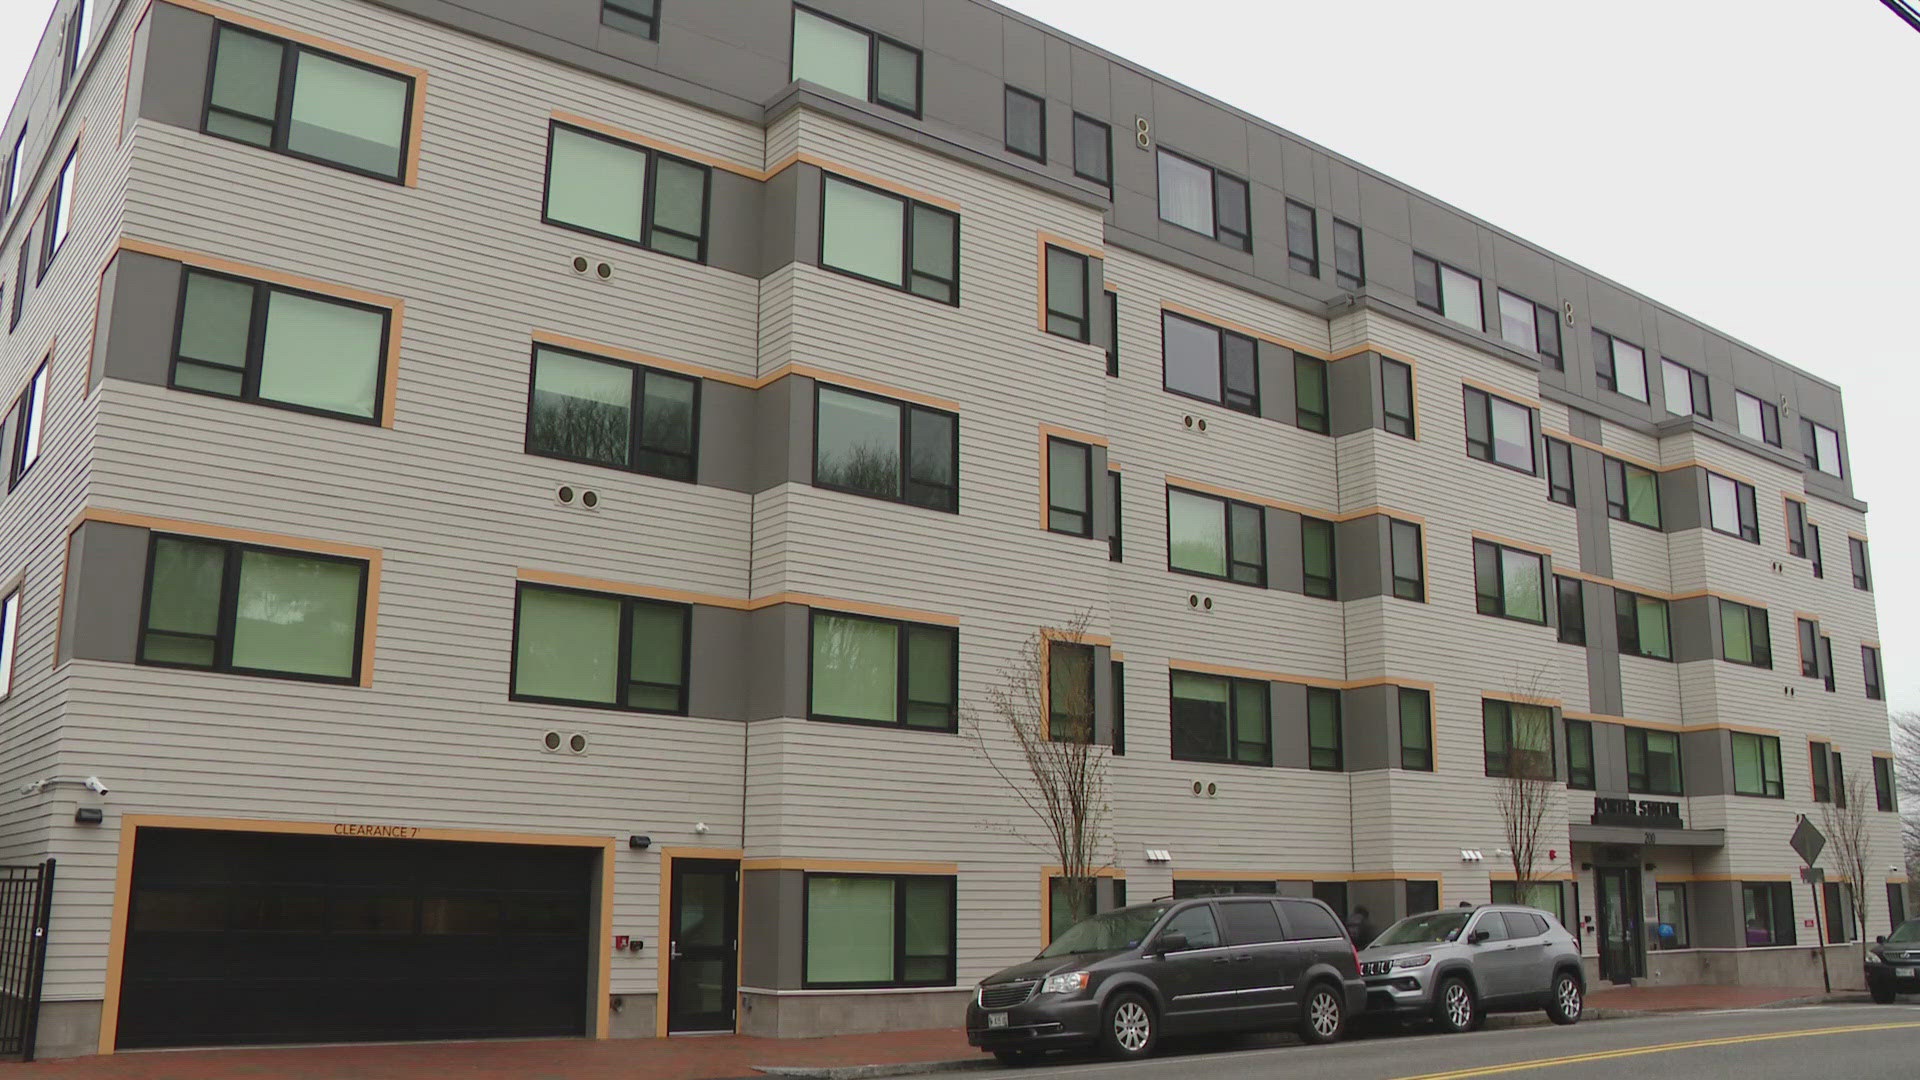 Avesta Housing says the apartments at Porter Station range in size from efficiencies to three-bedroom units.